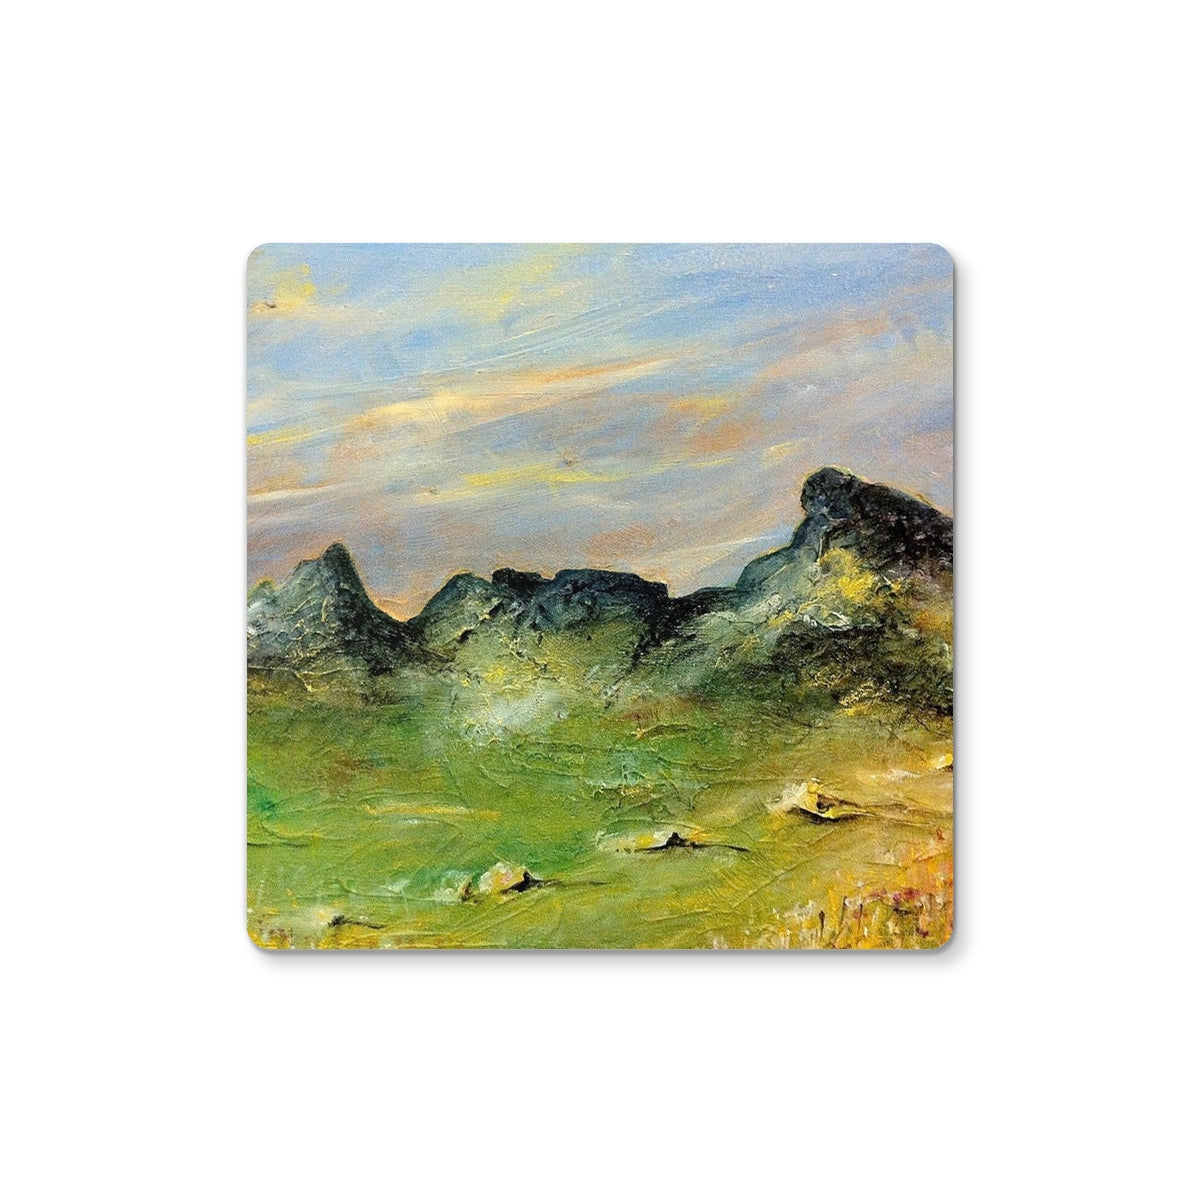 The Cobbler Art Gifts Coaster-Homeware-Scottish Lochs & Mountains Art Gallery-Single Coaster-Paintings, Prints, Homeware, Art Gifts From Scotland By Scottish Artist Kevin Hunter